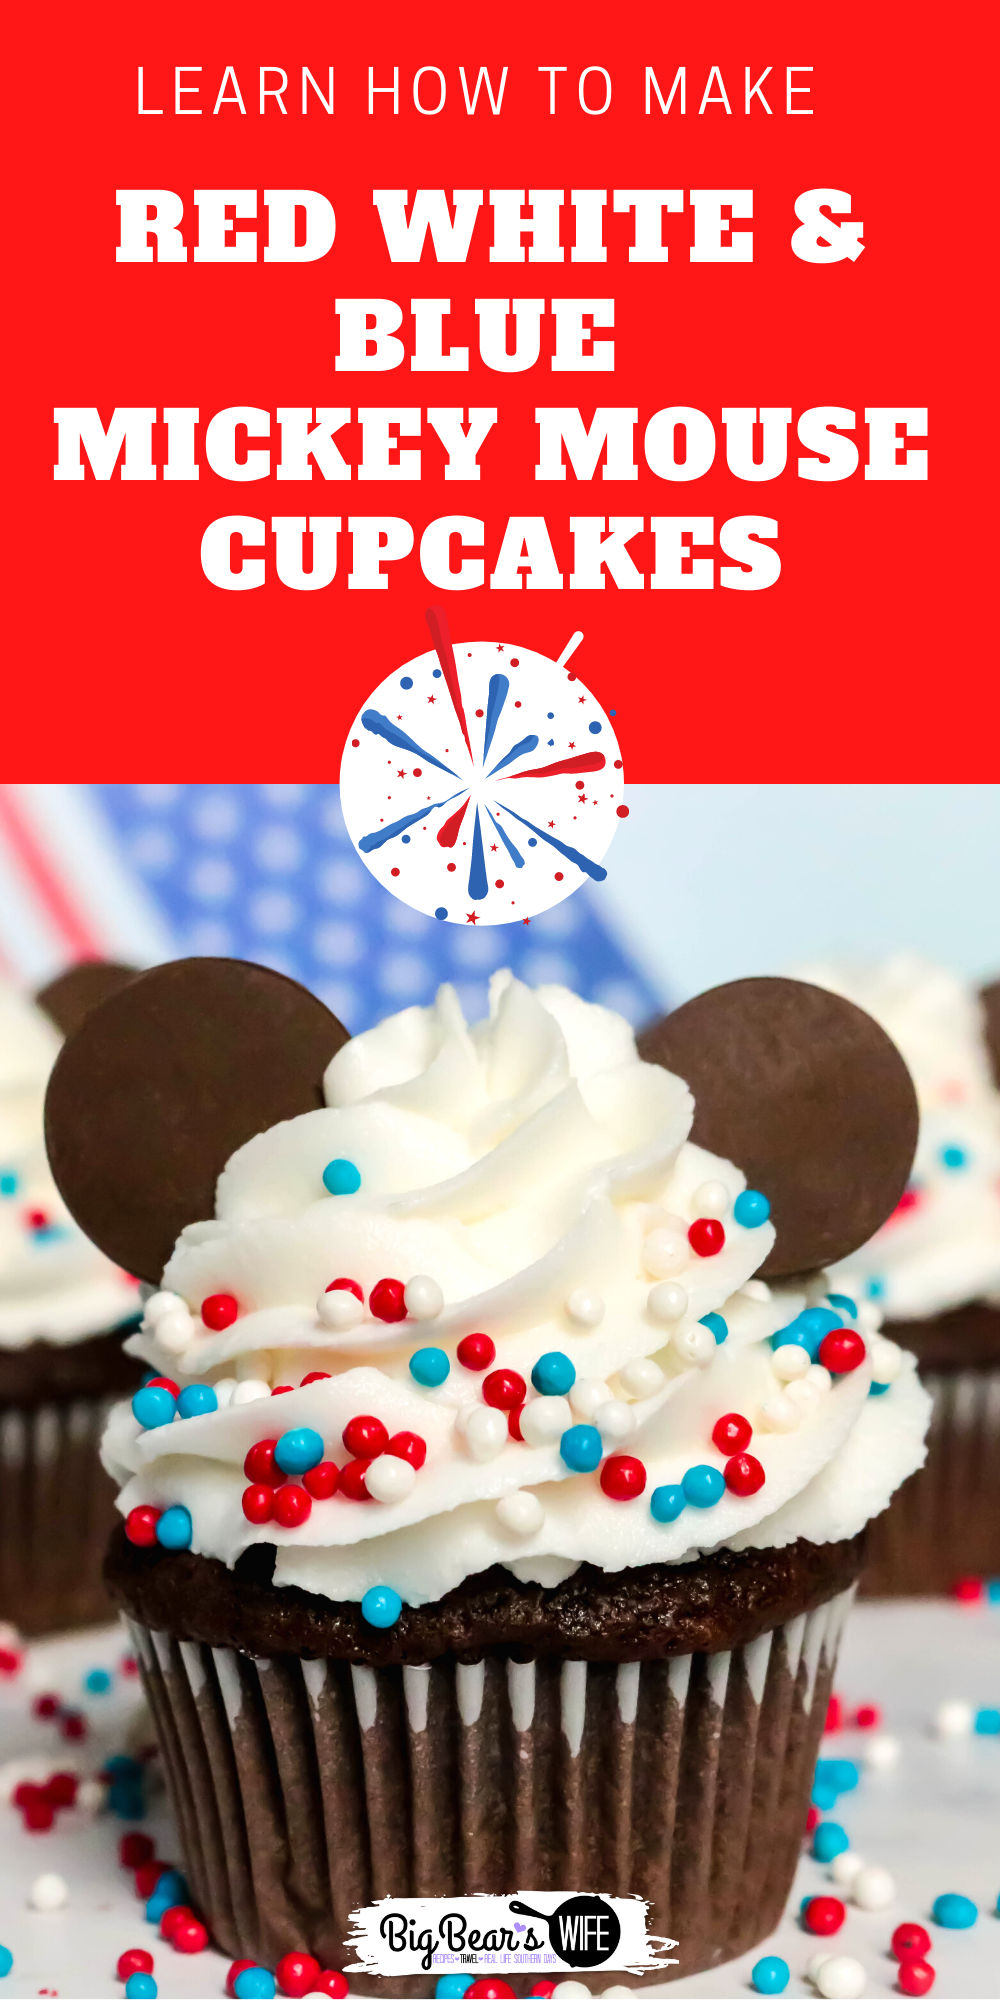 We might not be celebrating the 4th of July at Disney World this year but we're bringing Disney Magic home with these fun and festive 4th of July Mickey Mouse Cupcakes! These are perfect for any patriotic holiday! via @bigbearswife